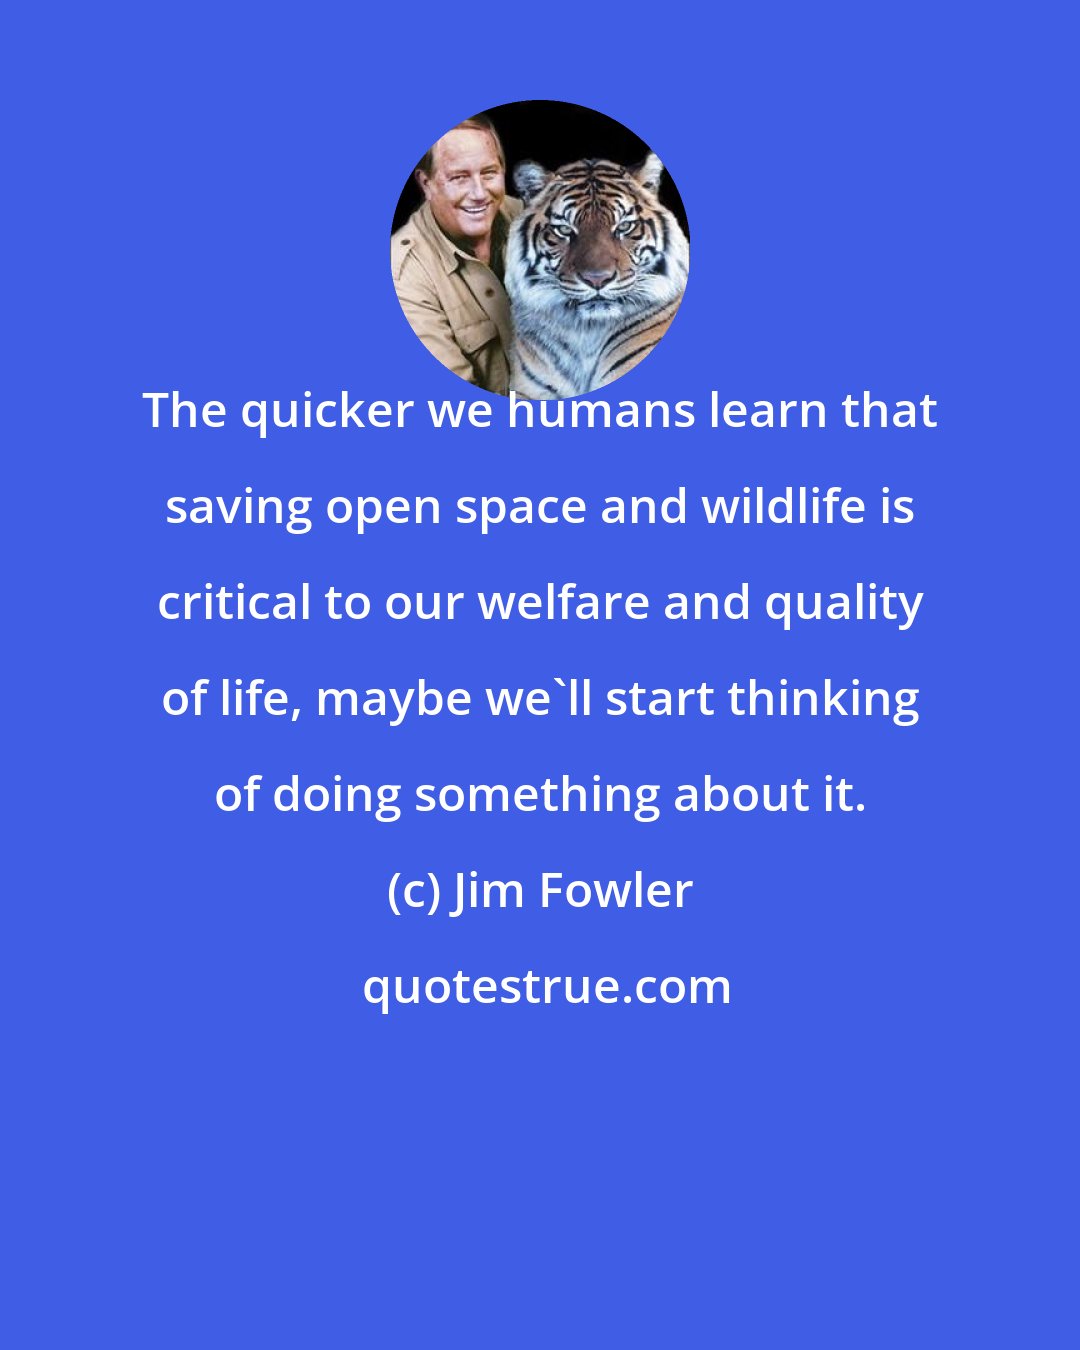 Jim Fowler: The quicker we humans learn that saving open space and wildlife is critical to our welfare and quality of life, maybe we'll start thinking of doing something about it.